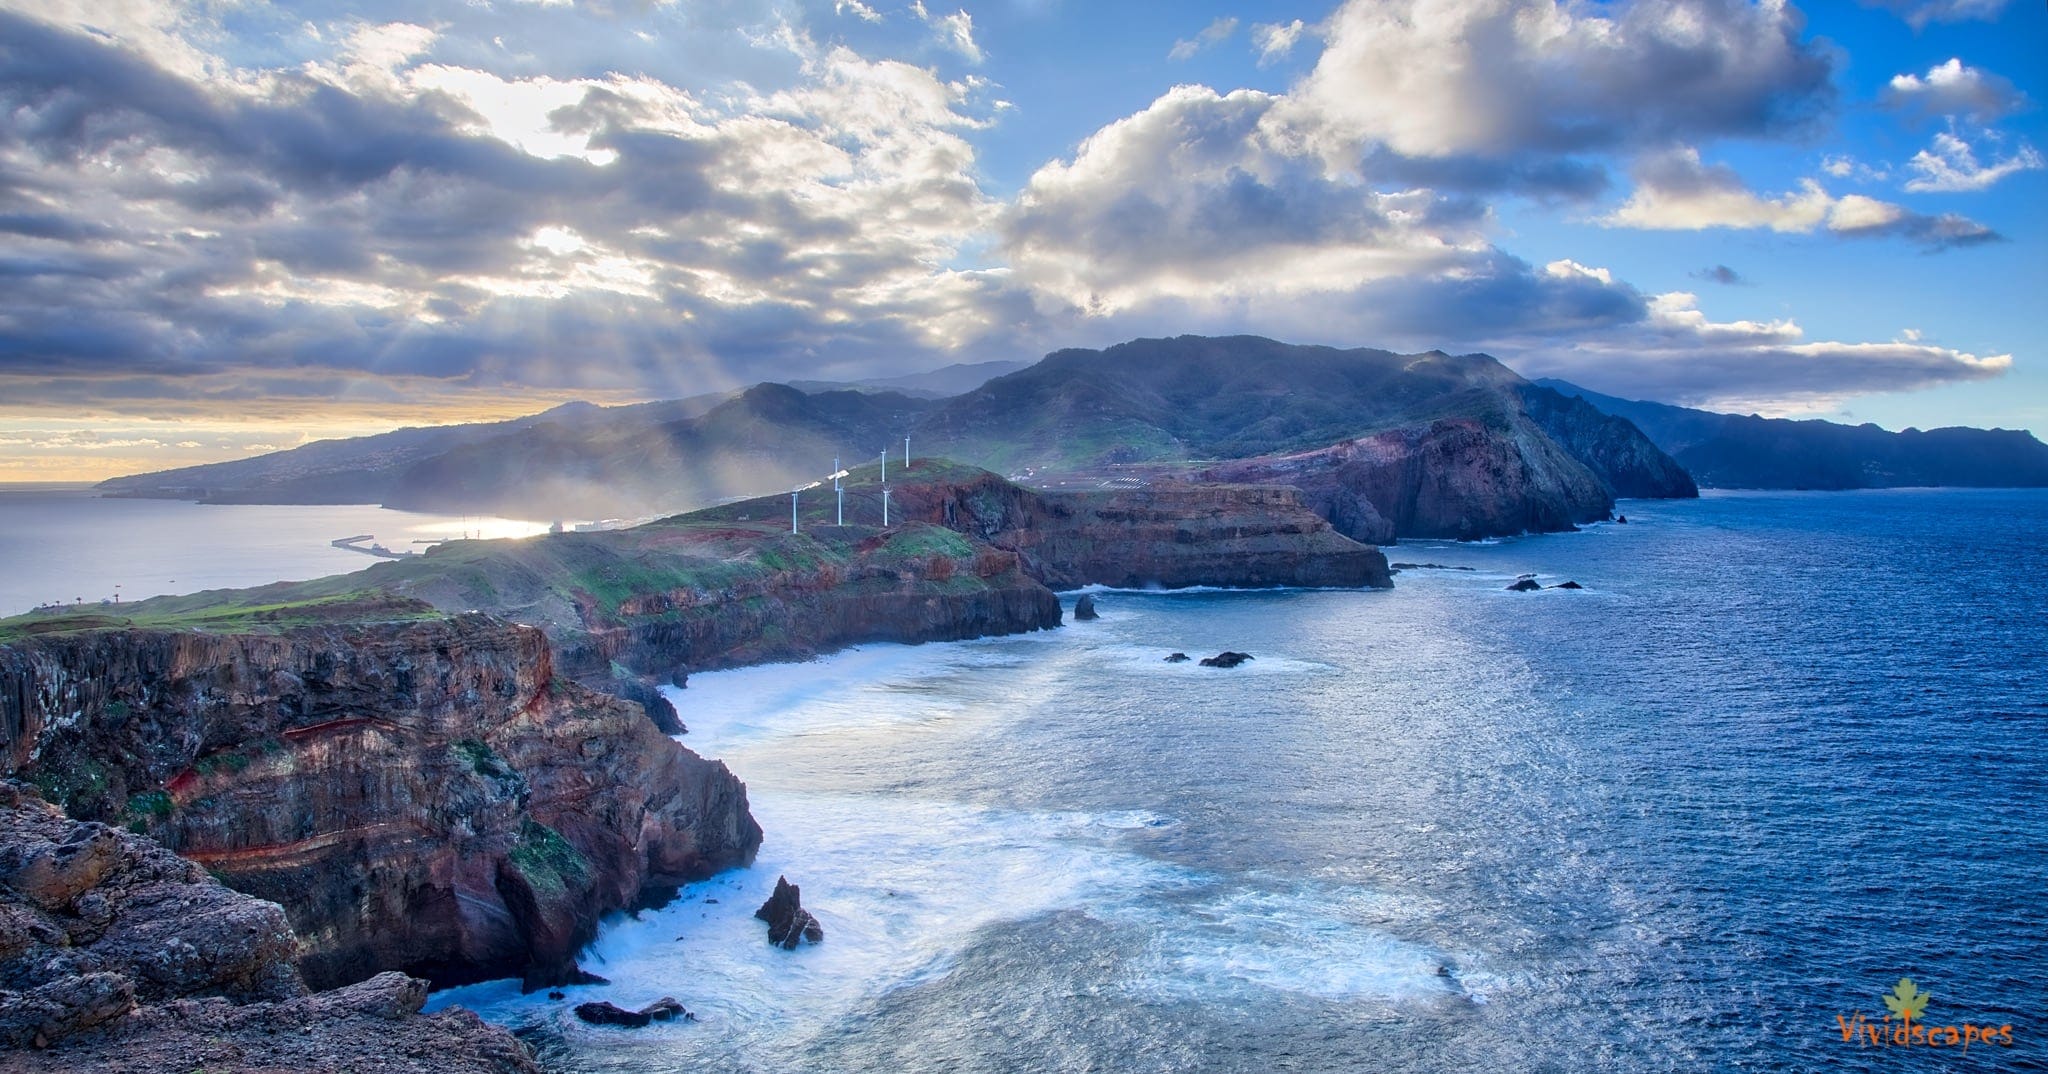 Photography and Hiking the Sunny Island of Madeira